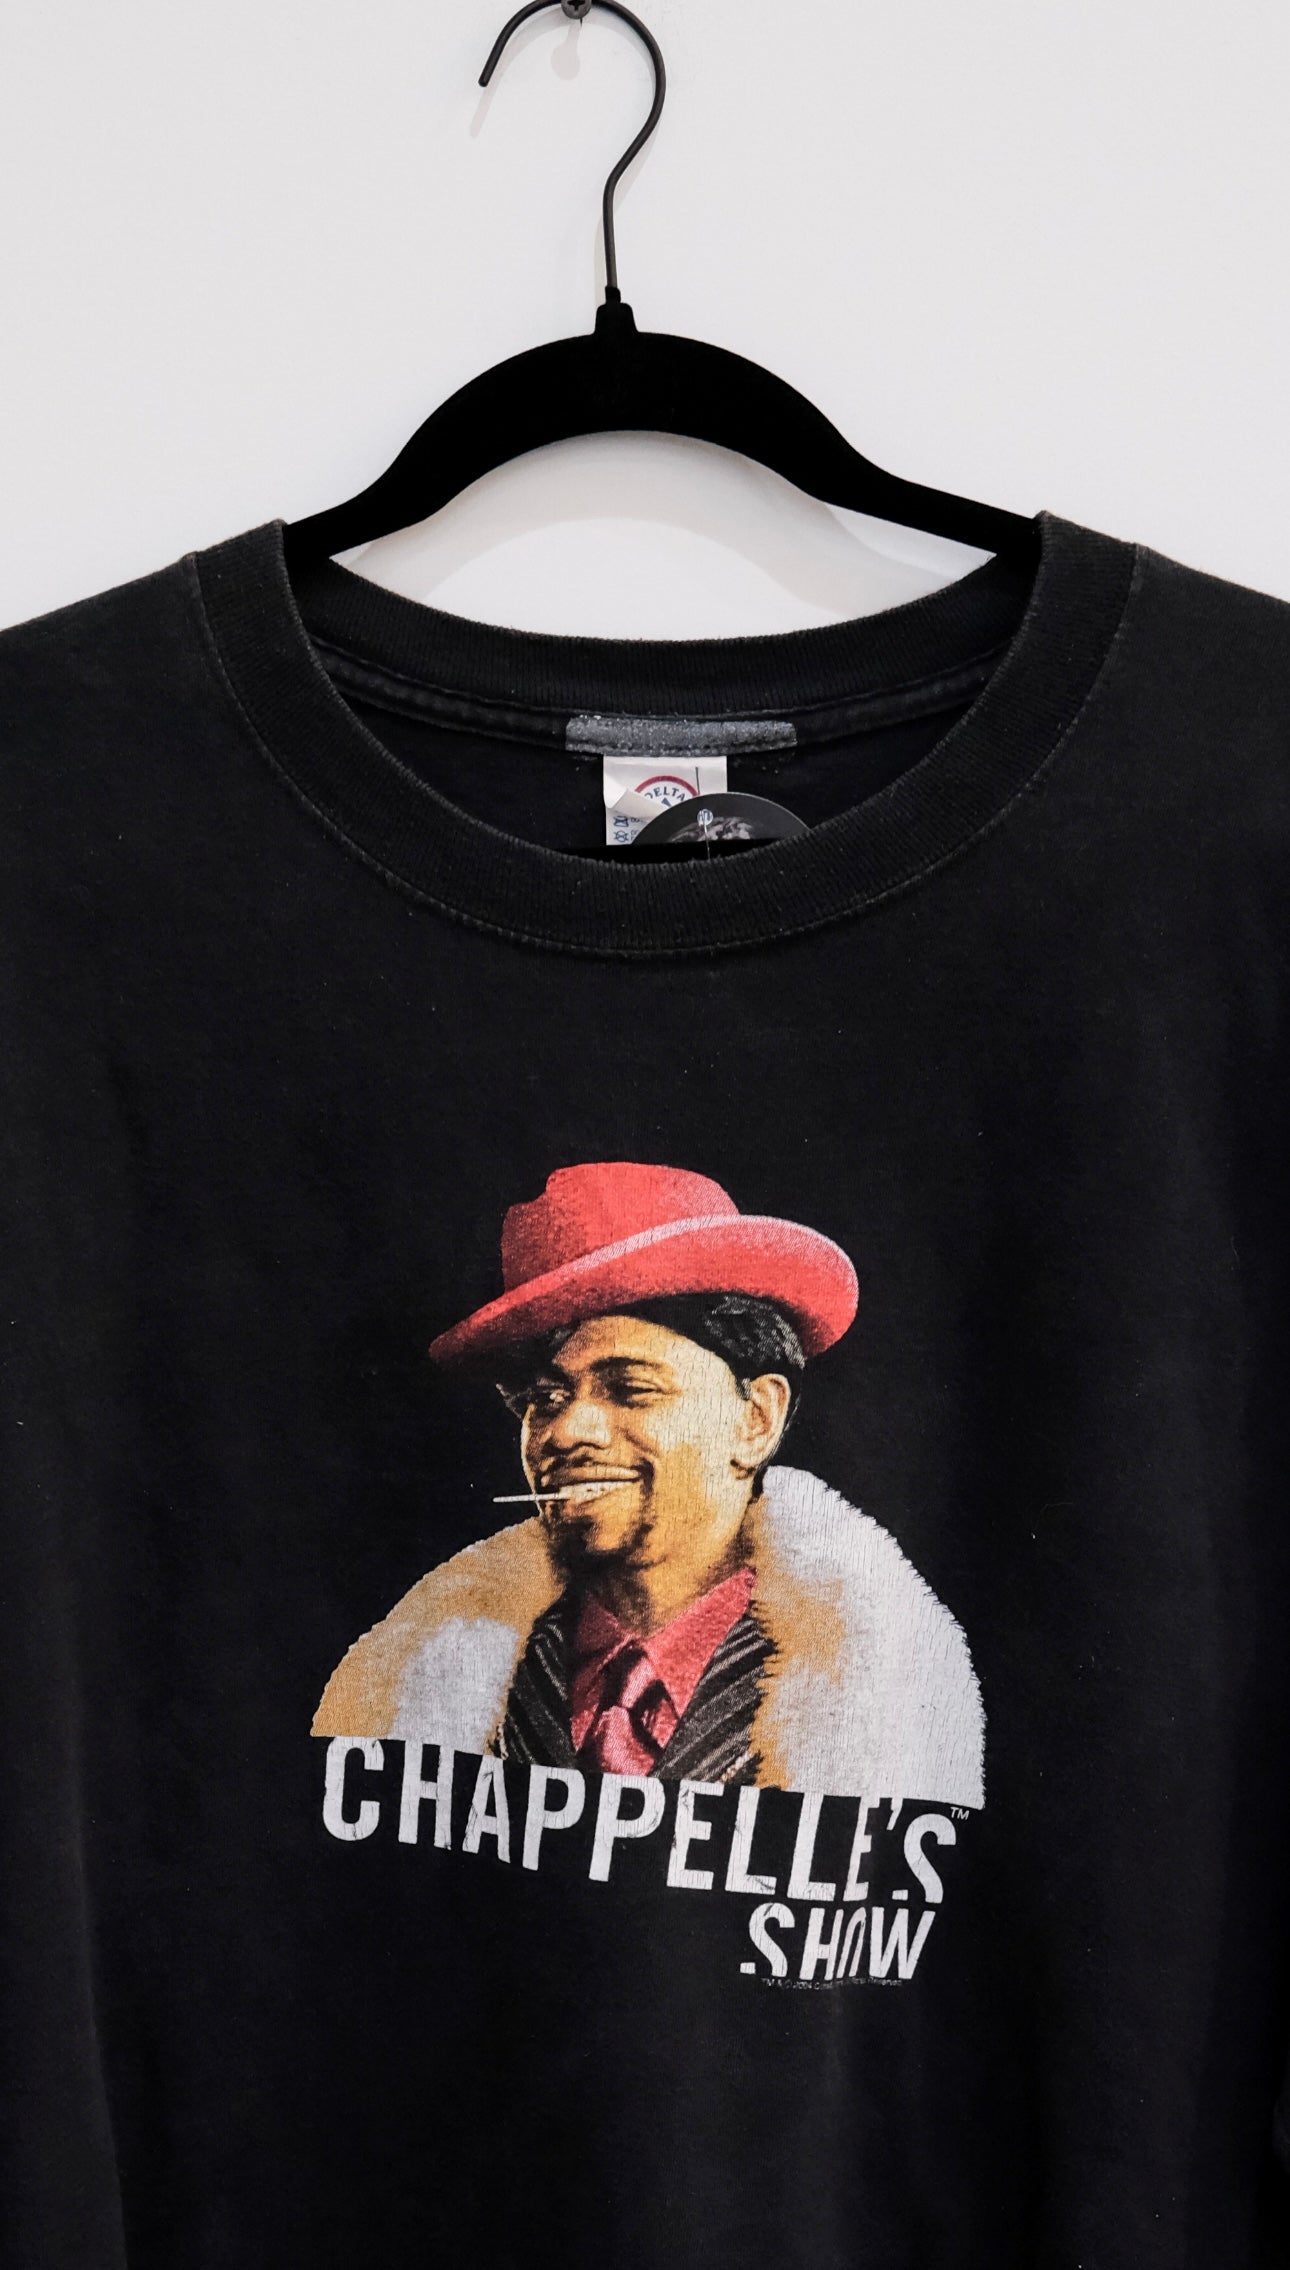 Chappelle's Show (Player Haters Ball) Promo Shirt